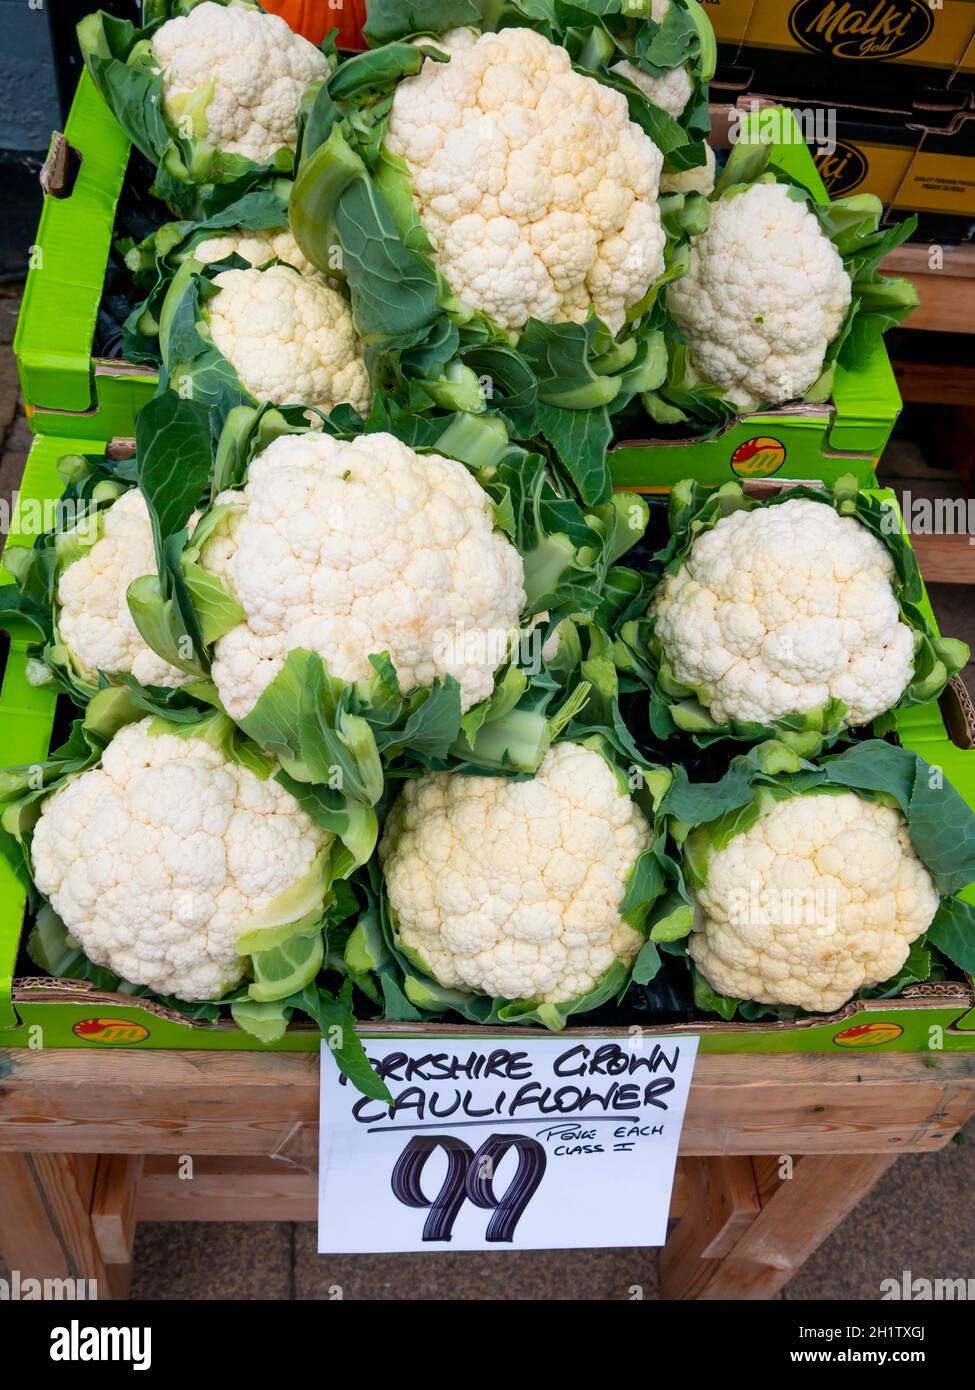 A display of fresh Class 1 Yorkshire grown cauliflowers in greengrocers shop in Stokesley North Yorkshire UK priced at £0.99 each 2021 Stock Photo